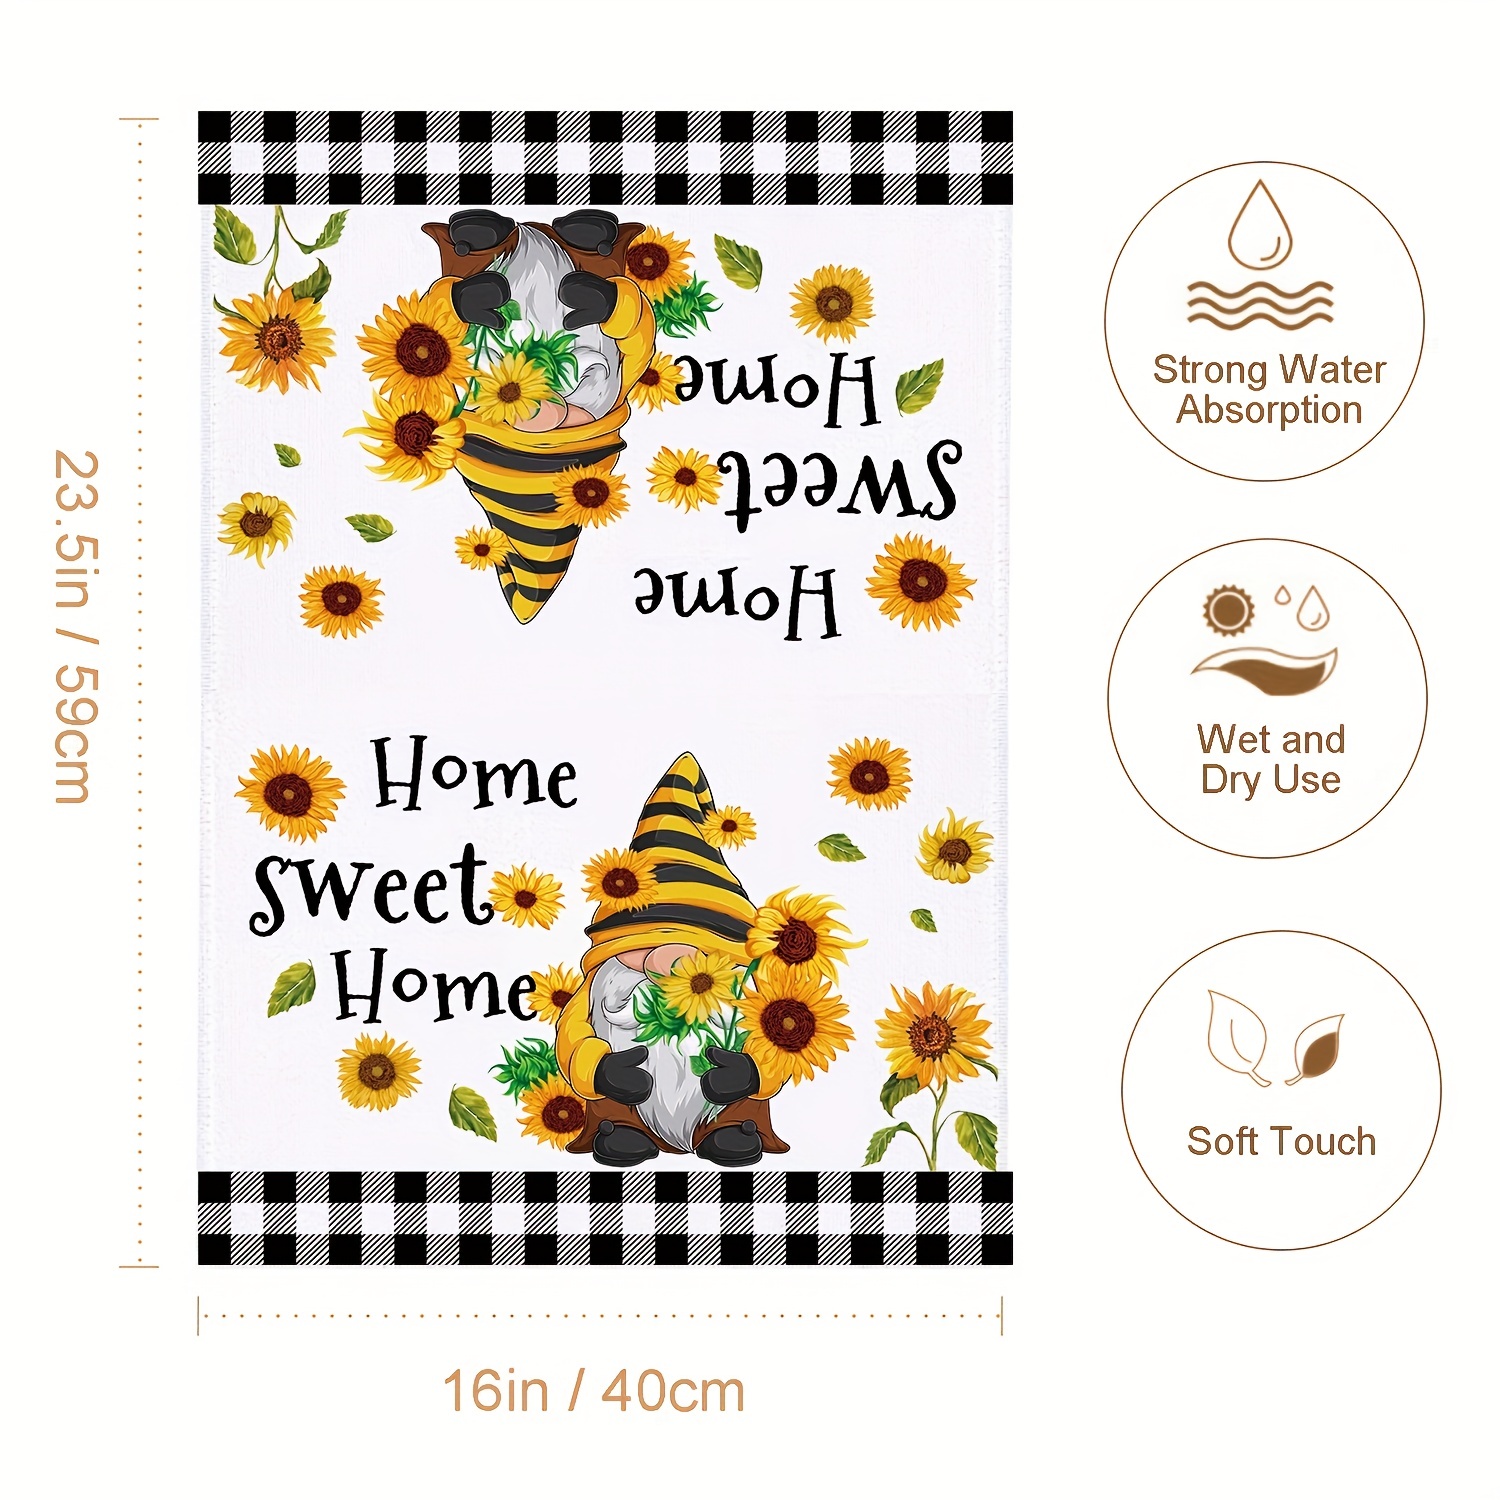 Bee Kitchen Towels, Kitchen Tea Towel Gifts, Bumble Bee Dish Towel Set,  Spring Bee Home Decor Gift Ideas, 16 x 24 Decorative Hand Towels